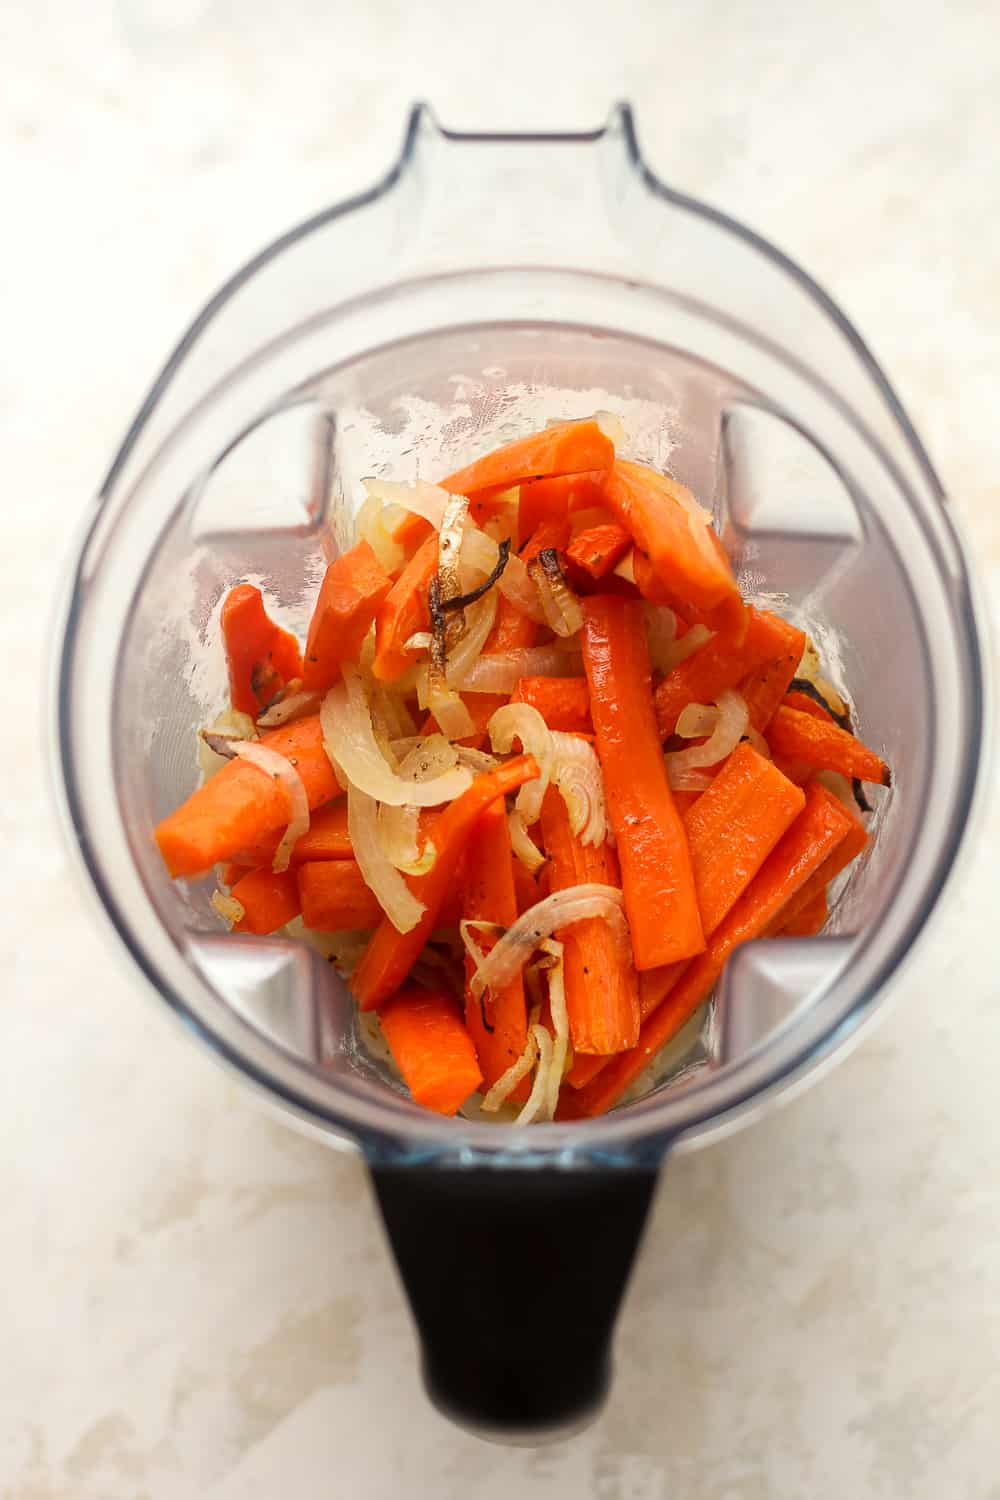 A blender of the roasted carrots and onions.